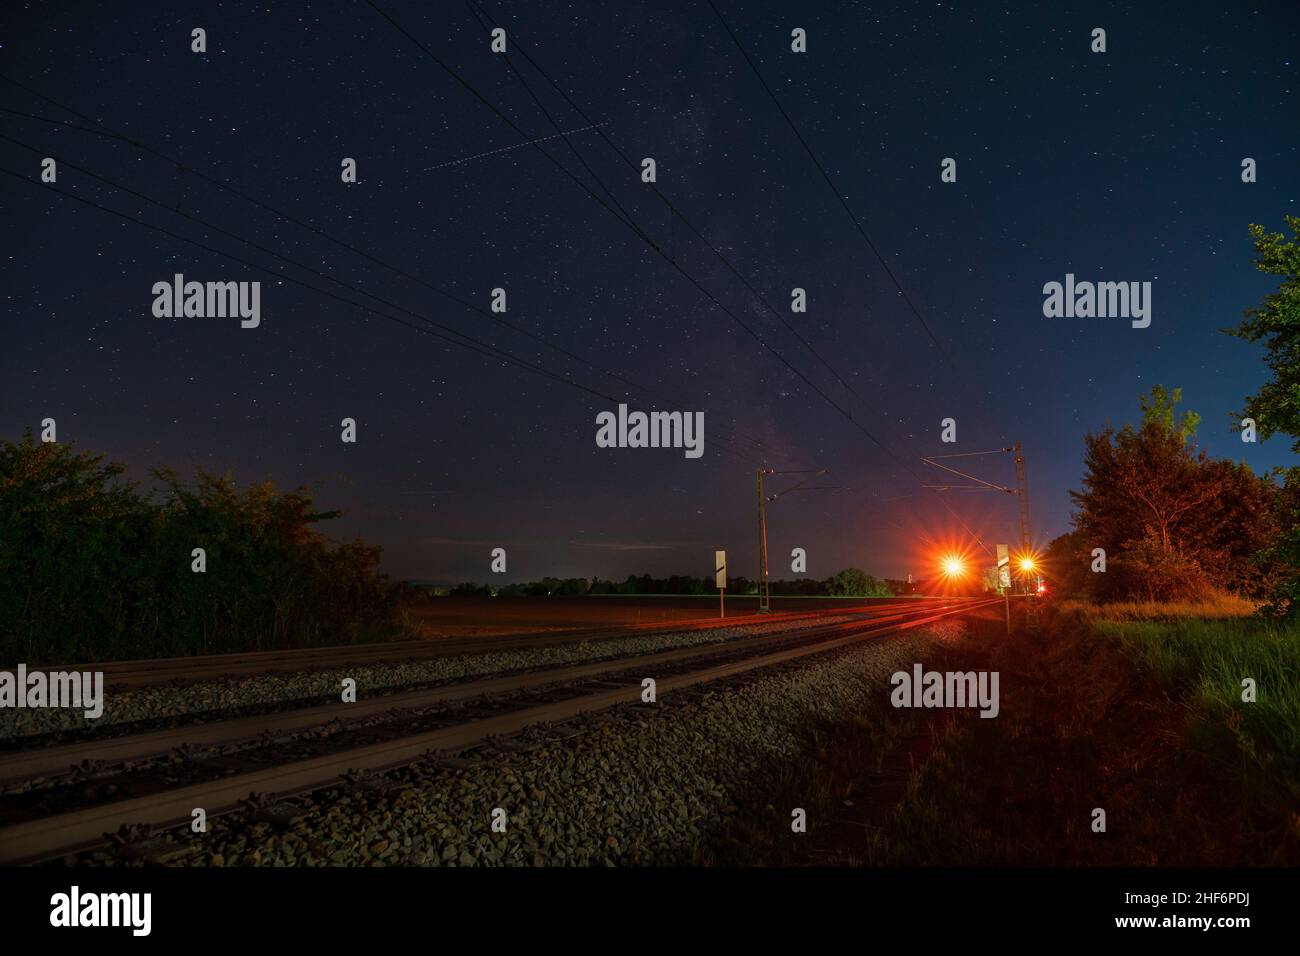 Milkyway with its galactical centre over a lonely railway track standing over the stop train signal at a starry night Stock Photo